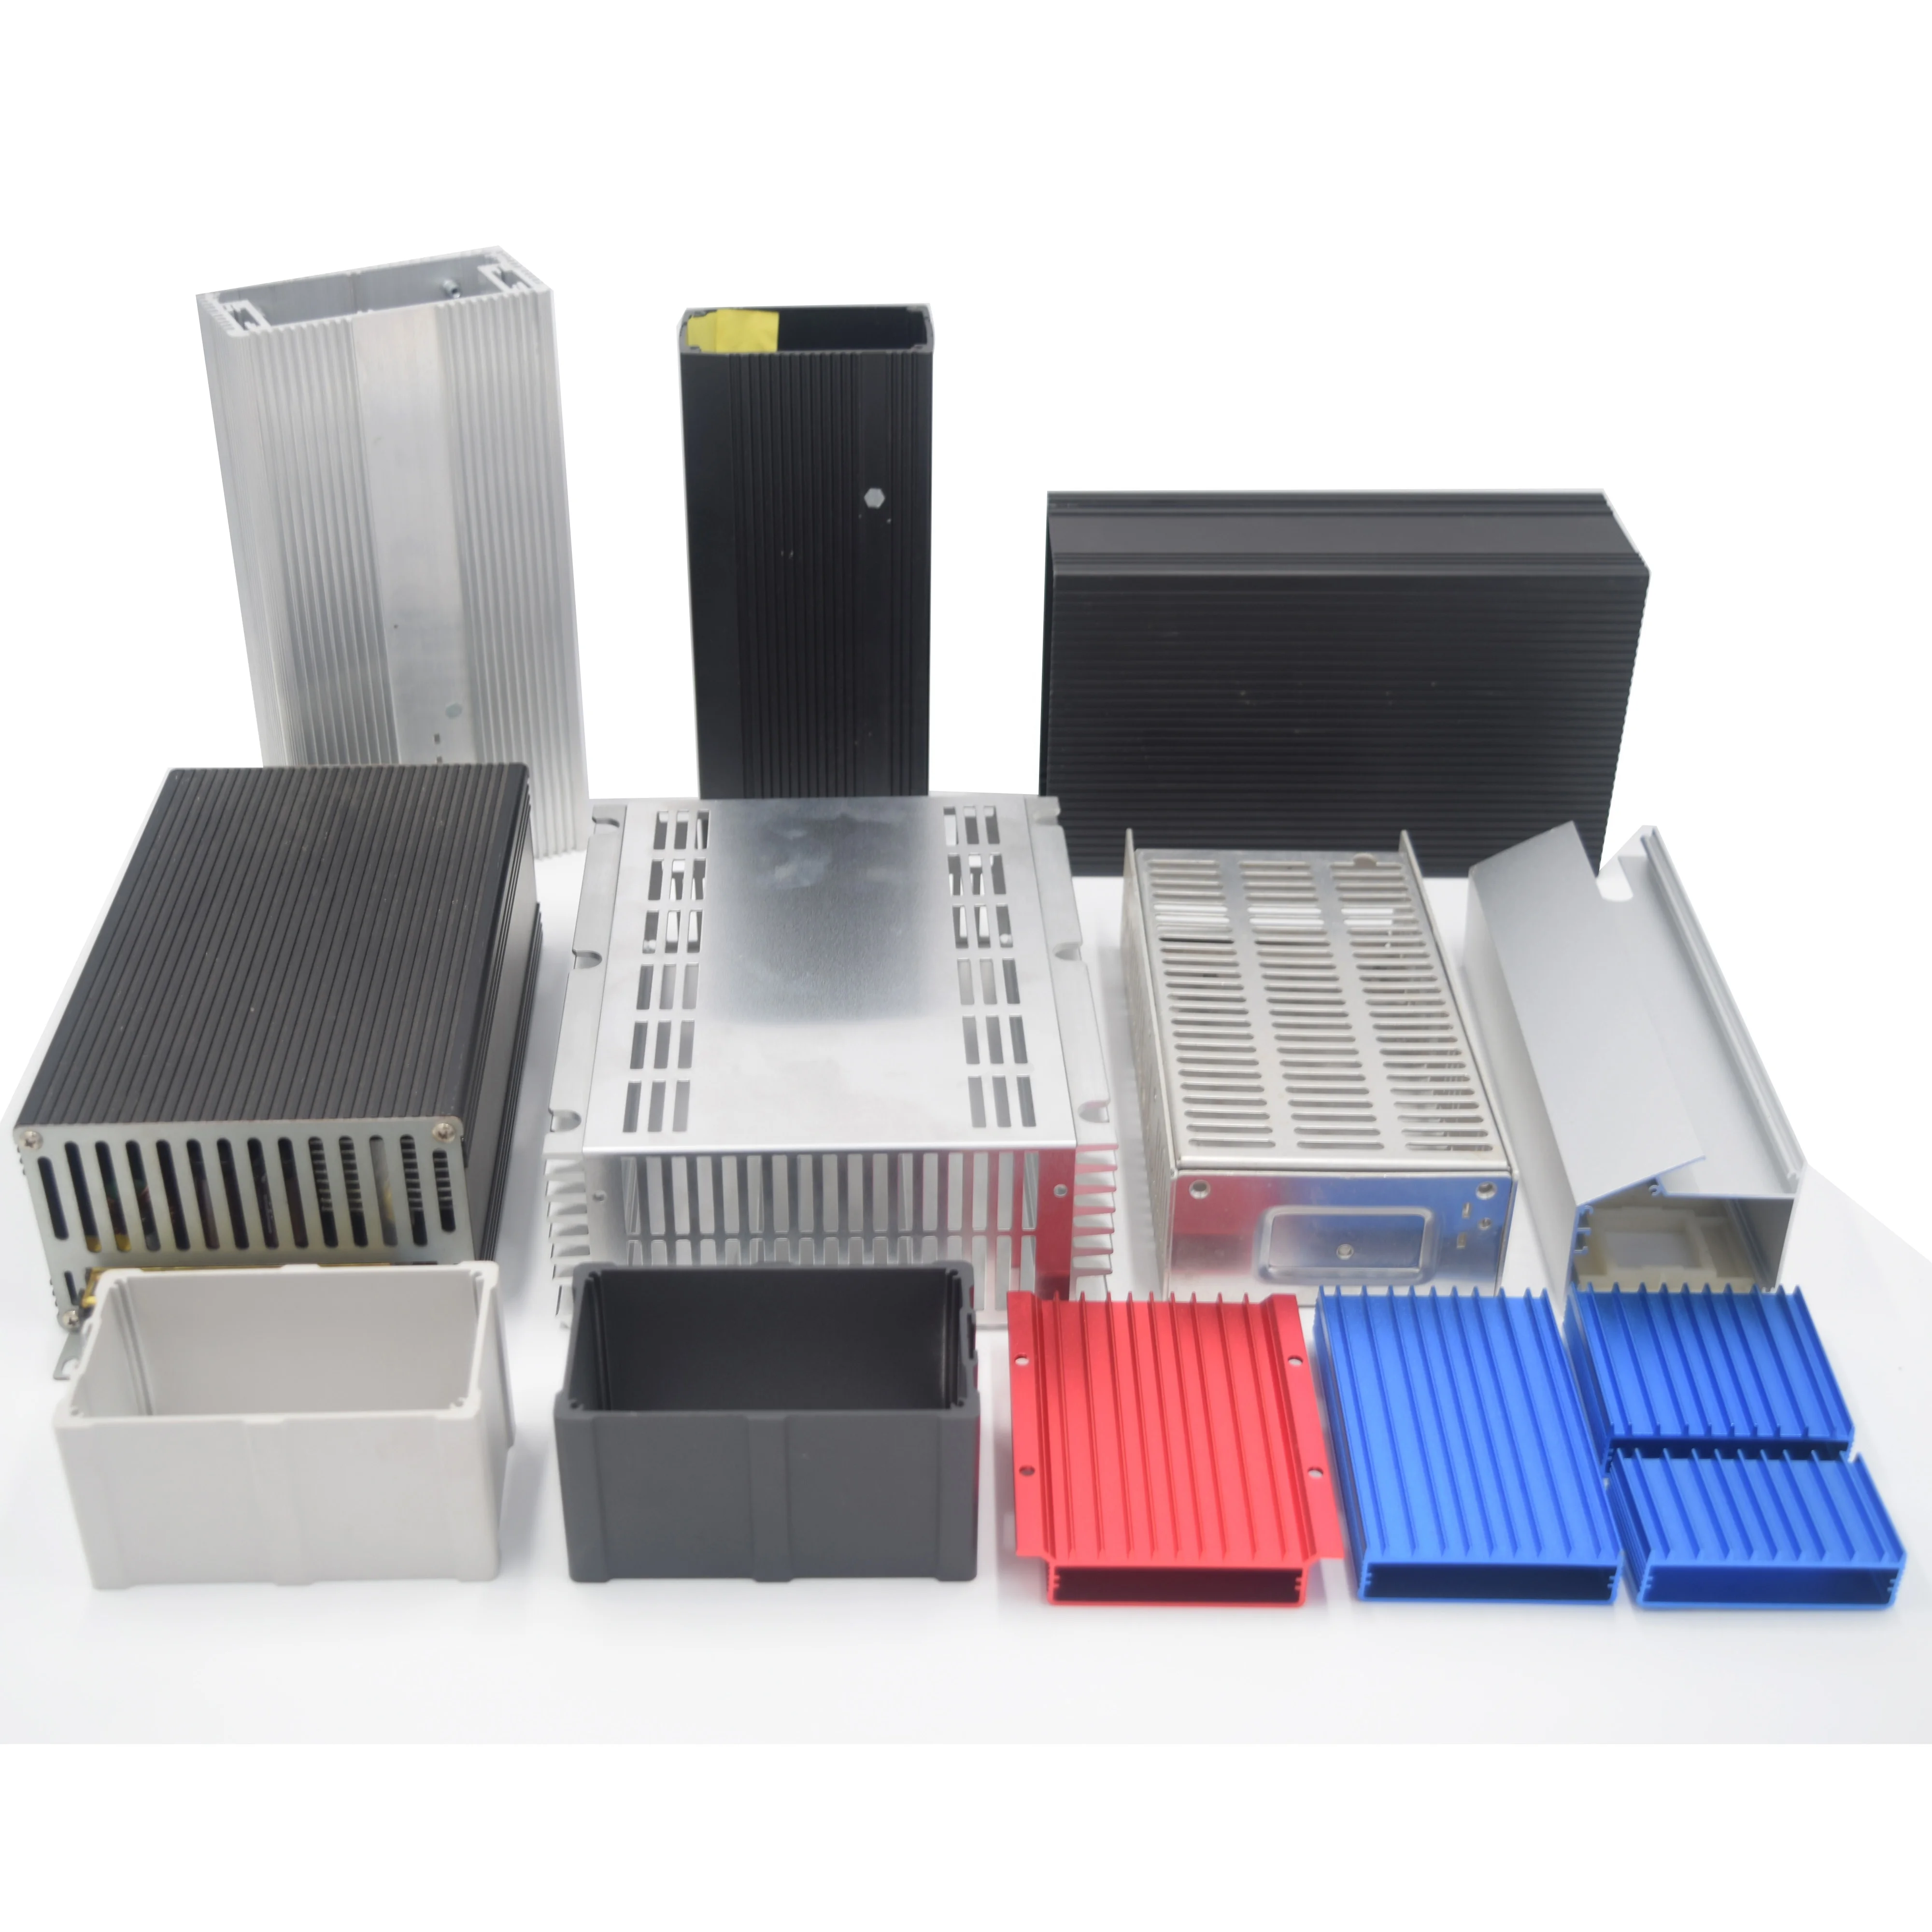 Custom Extruded Aluminum PCB Enclosure of All Sizes High Quality Metal Housing for Power Supply, Batteries and Equipments